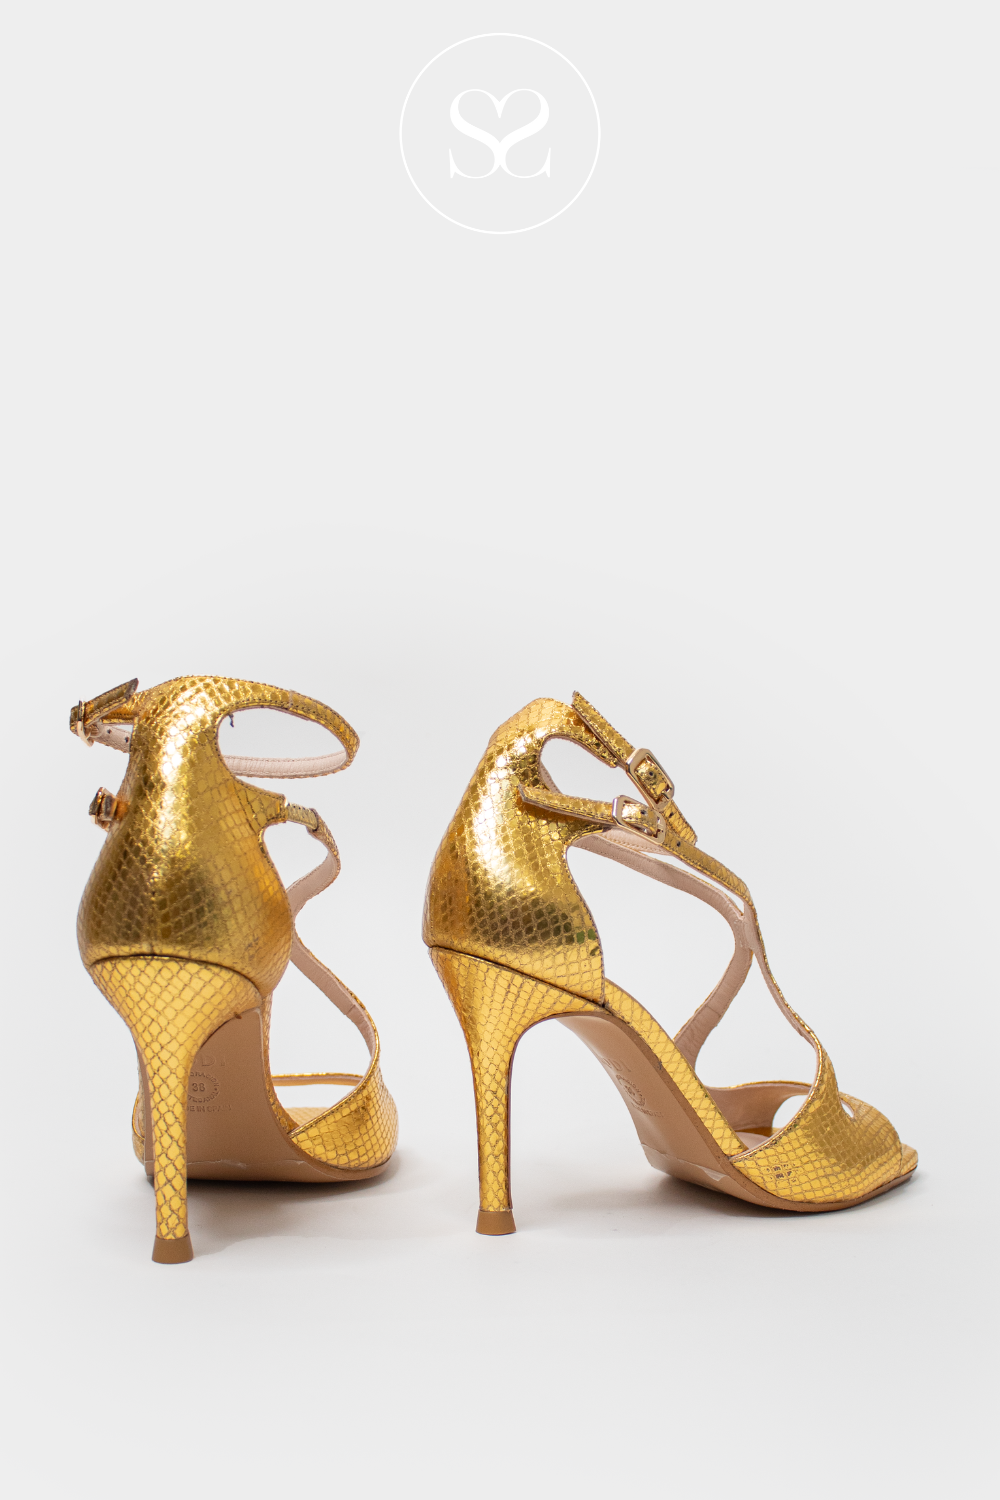 LODI SASUE ANTIQUE GOLD METALLIC GLADIATOR STYLE HIGH HEEL SANDALS WITH SQUARE TOE AND TWO ADJUSTABLE ANKLE STRAPS